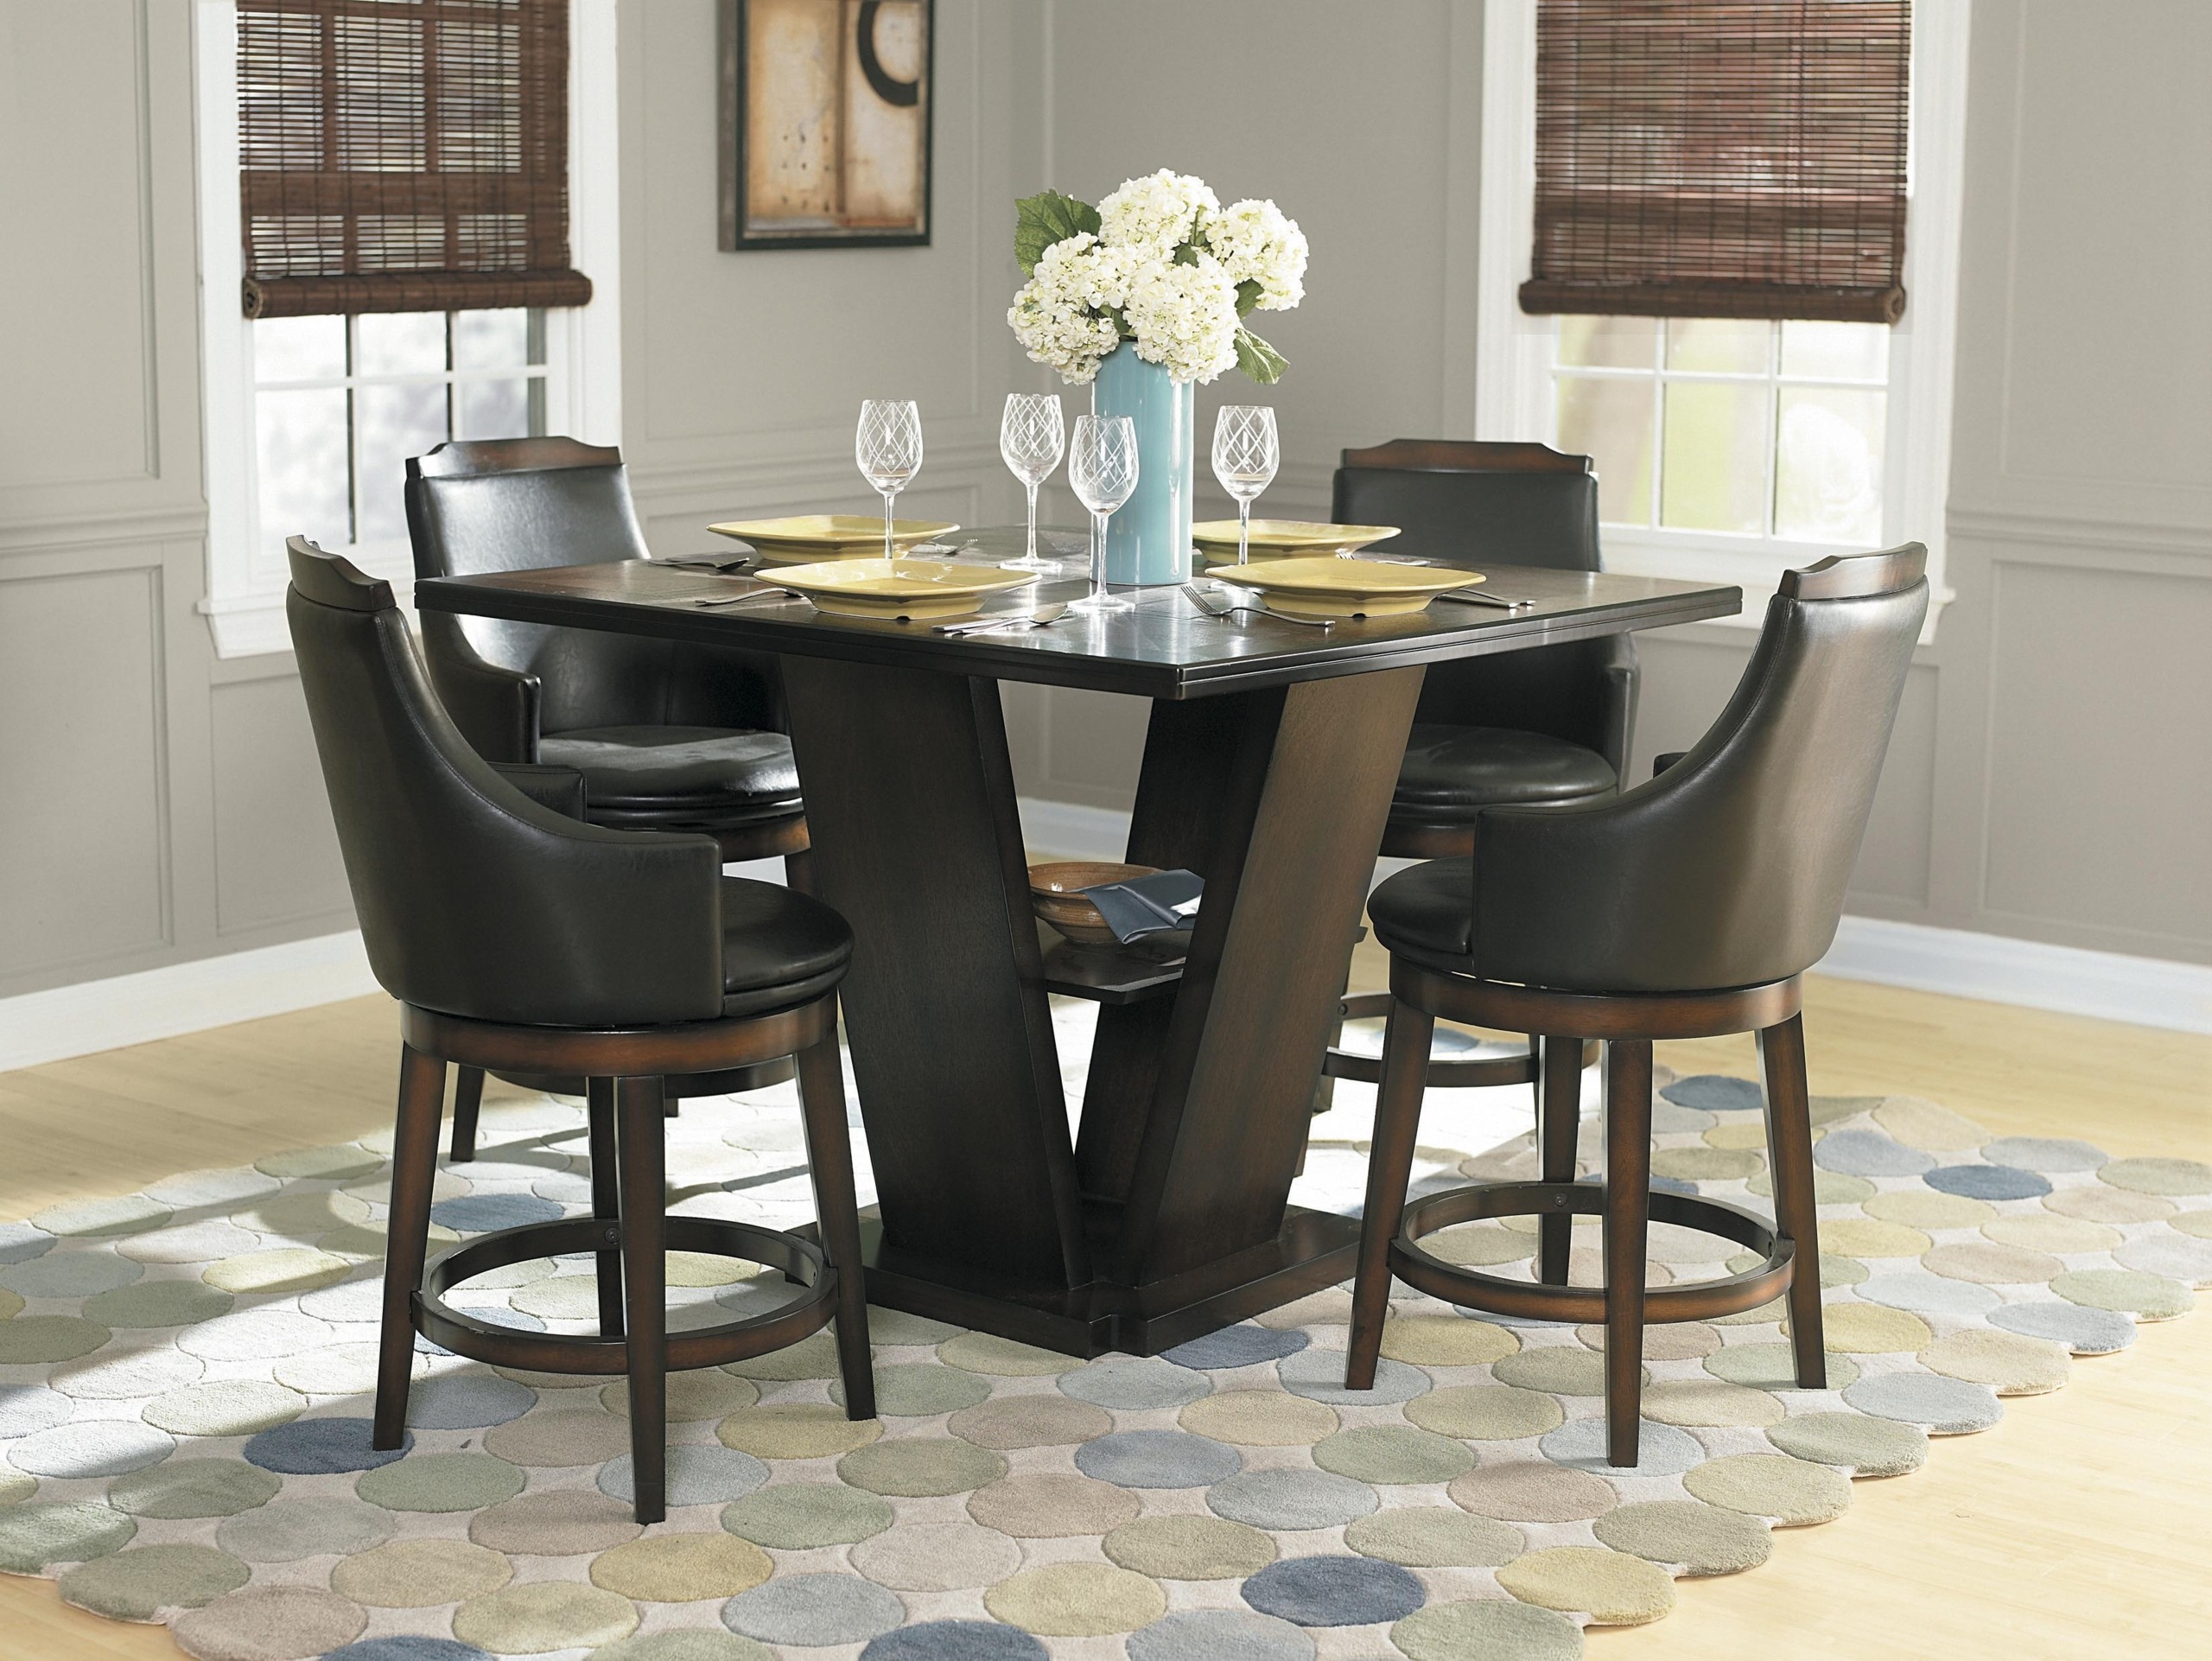 Counter Height Dining Room Sets For Small Spaces